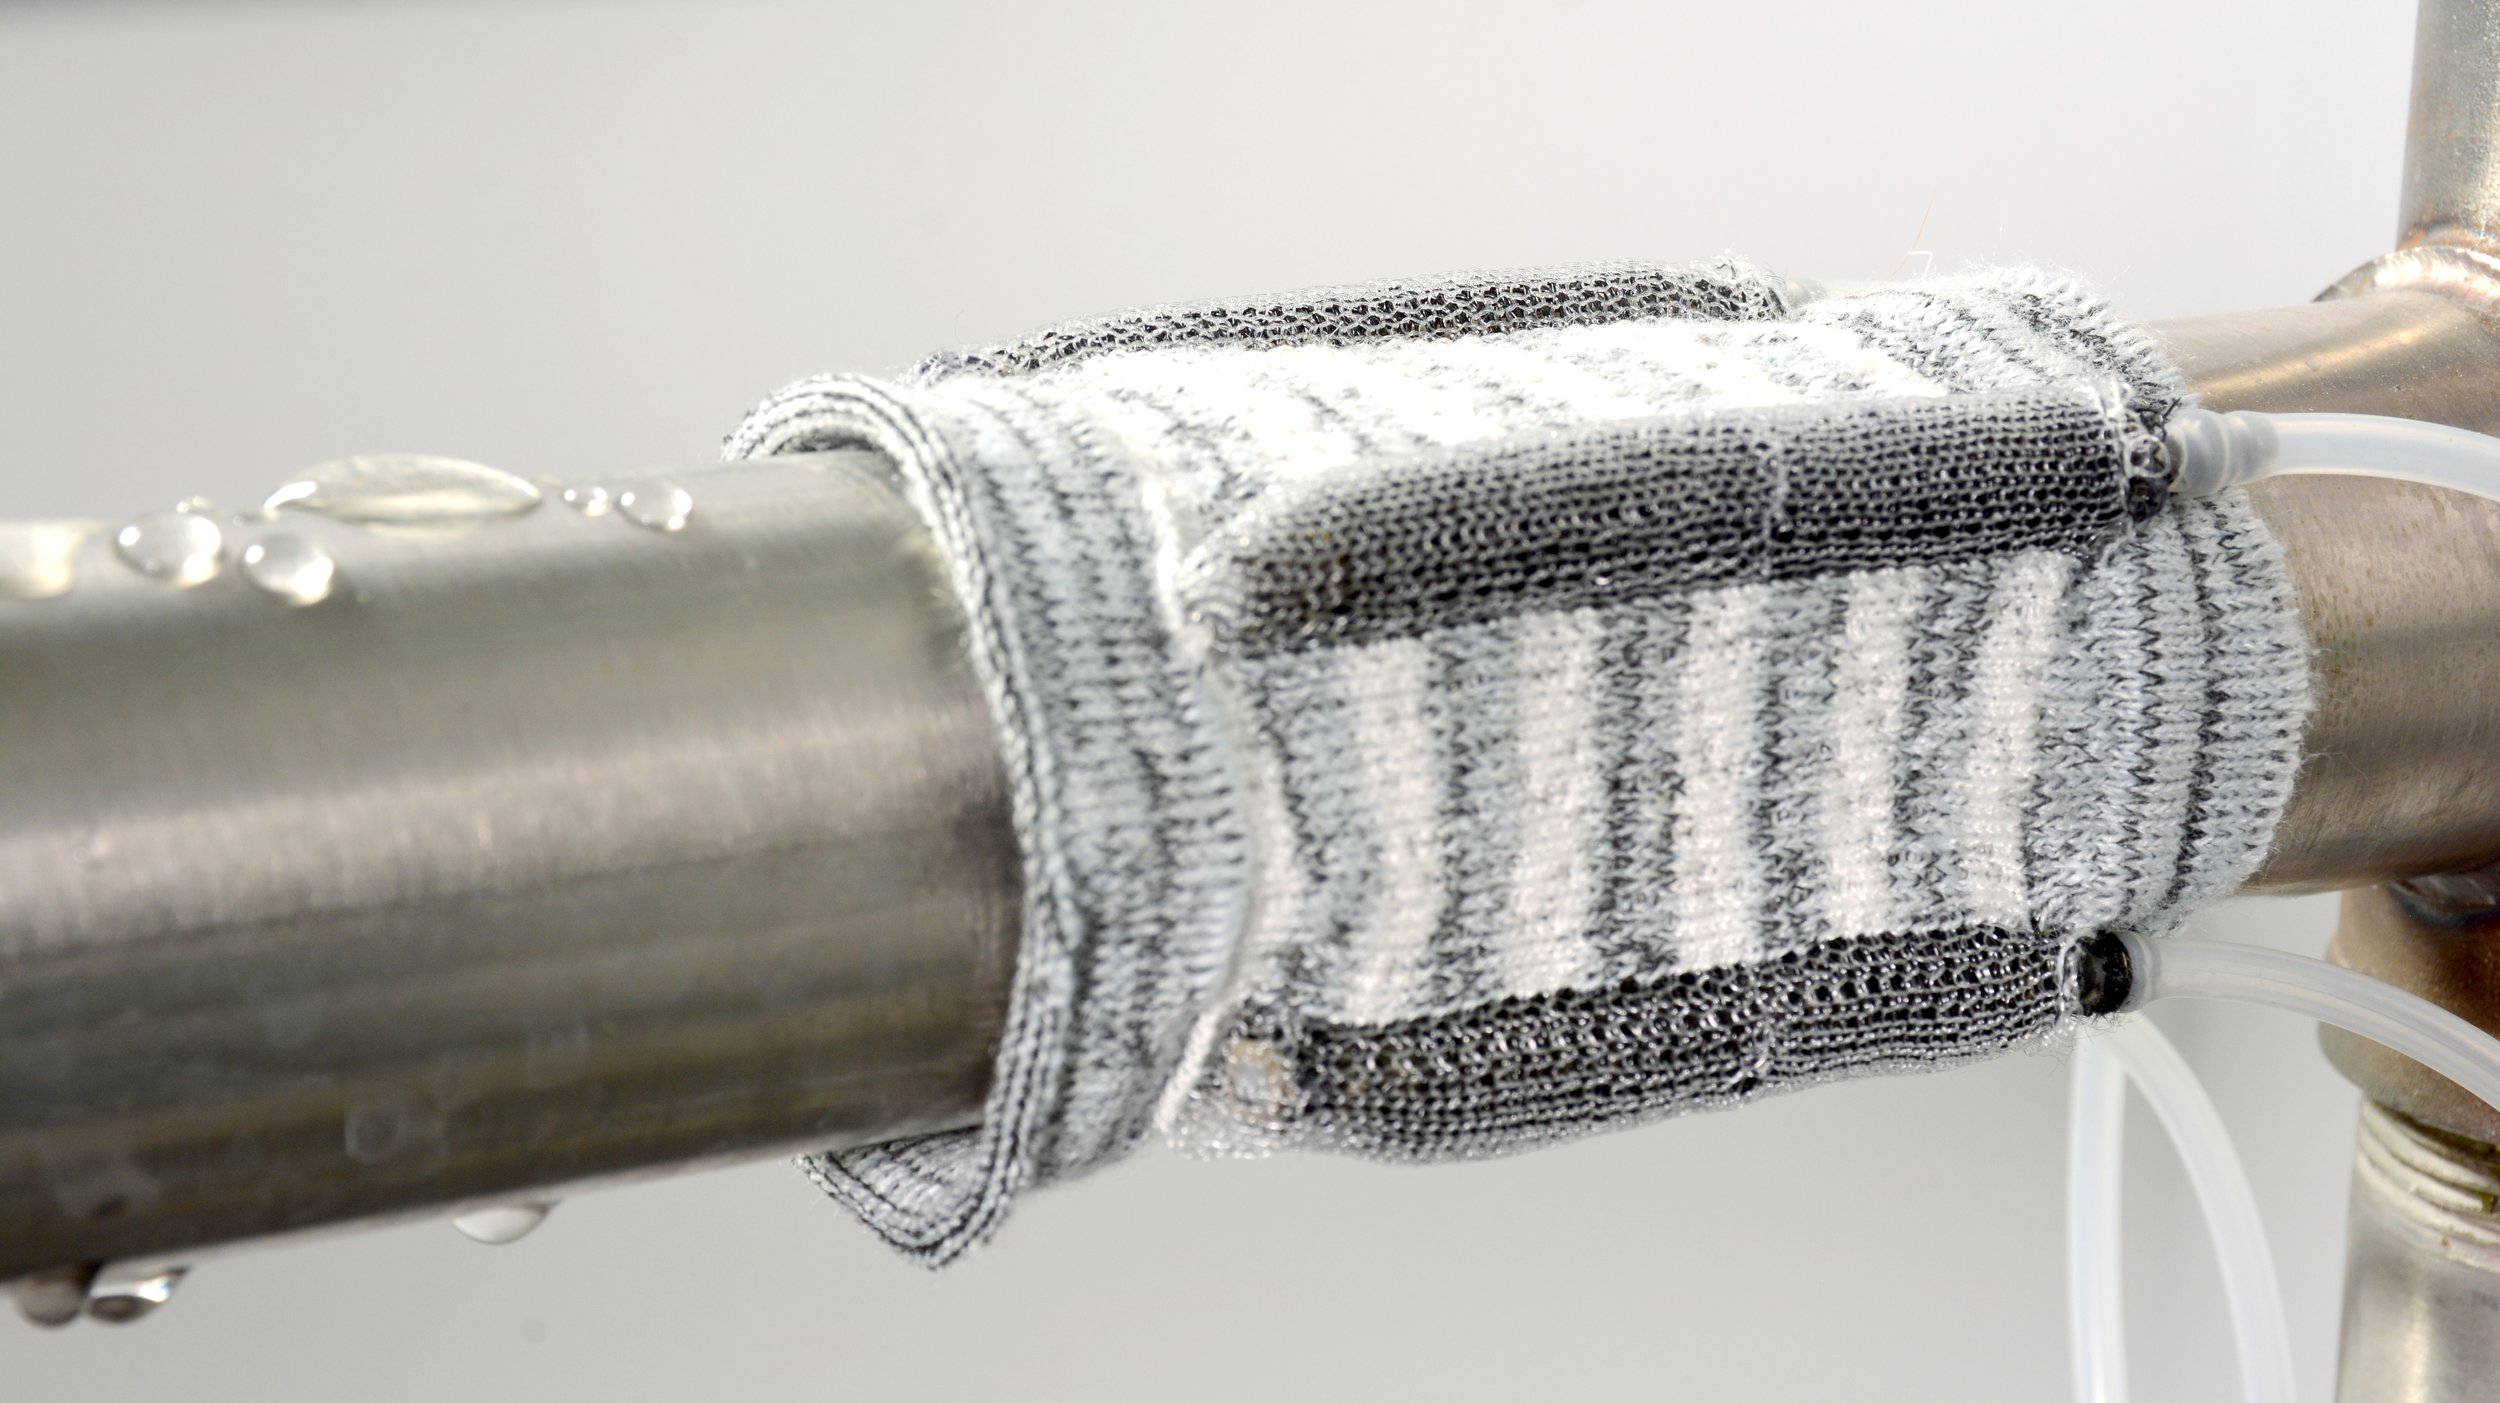  KnitSkin’s ground layer can be knit with a wide range of materials, including water-soluble PVA yarn. When the interface travels along a leaking pipe, the PVA yarn dissolves and stiffens as the yarn dehydrates. The hardened surface of KnitSkin could